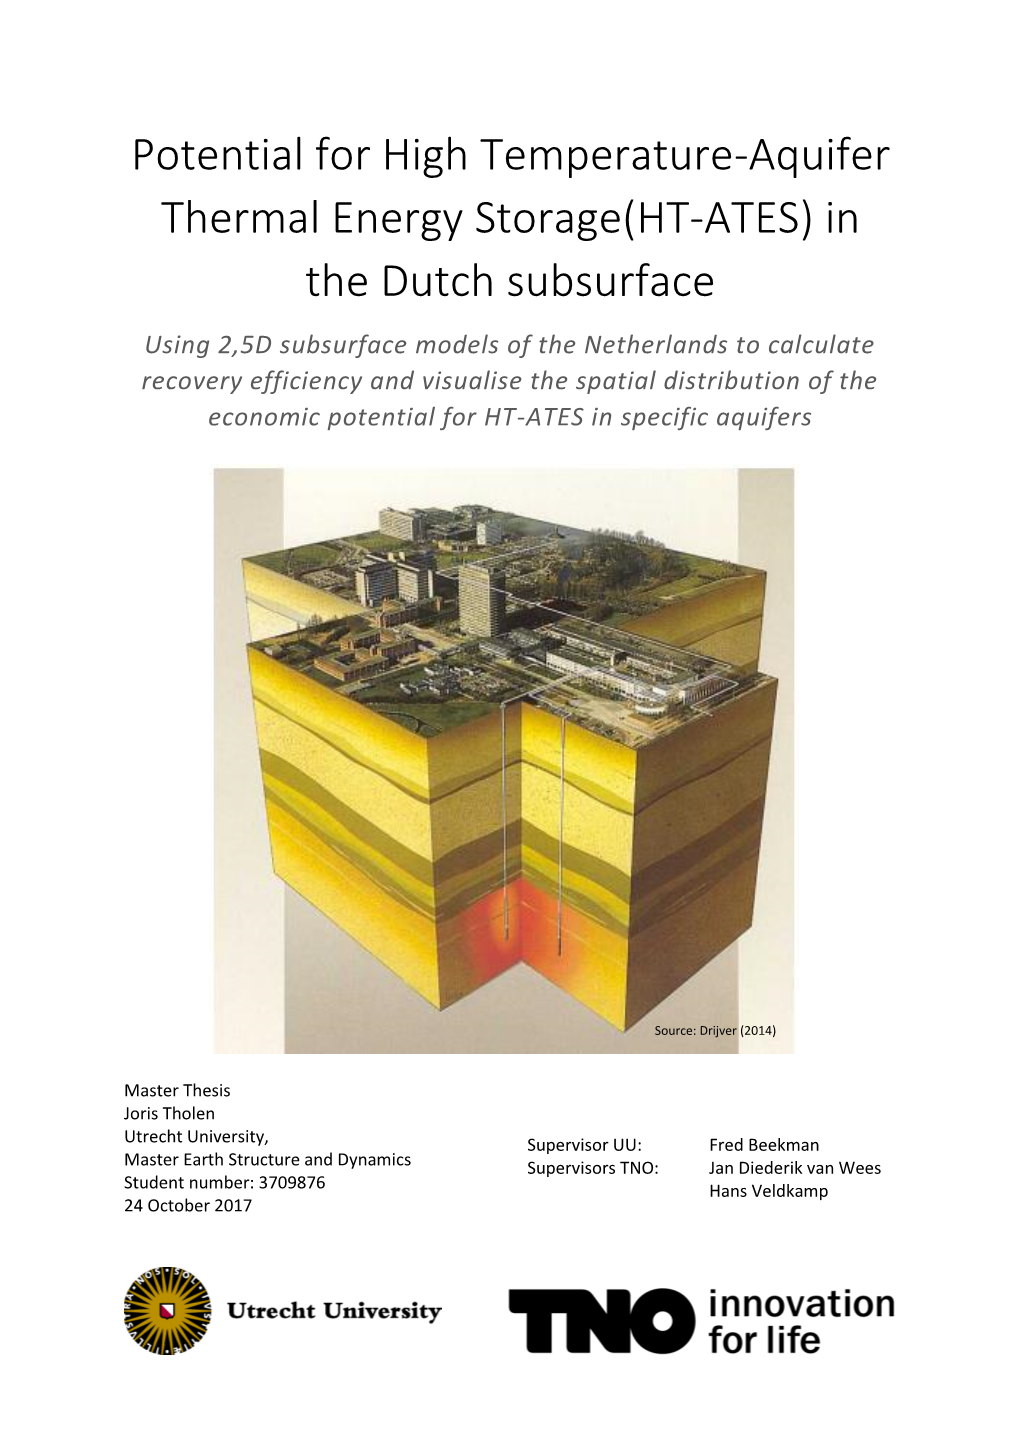 Potential for HT-ATES in the Dutch Subsurface Abstract